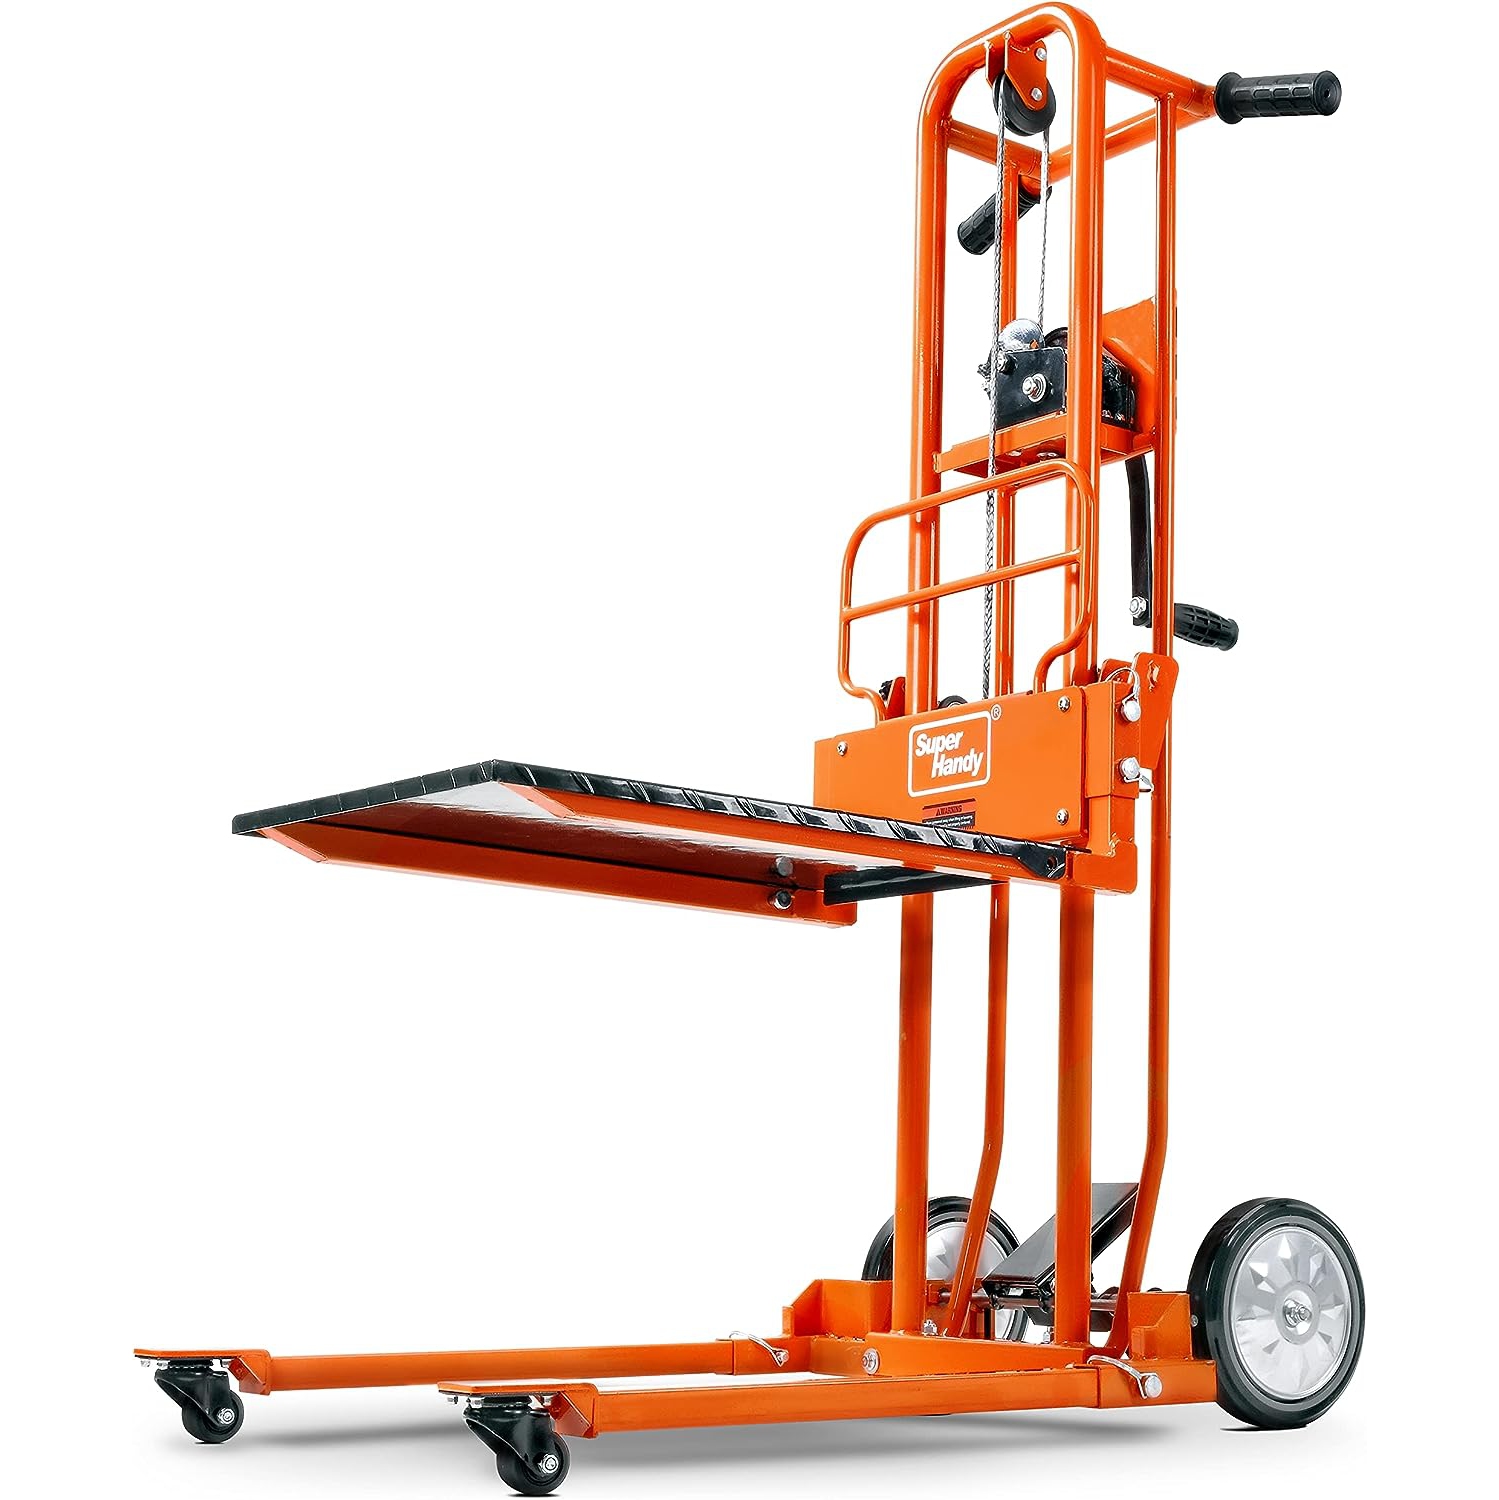 SuperHandy Material Lift Winch Stacker: Pallet Truck Dolly & Lift Table, 150kg Capacity, 101.6cm Max Lift, 20.3cm Wheels with Swivel Casters